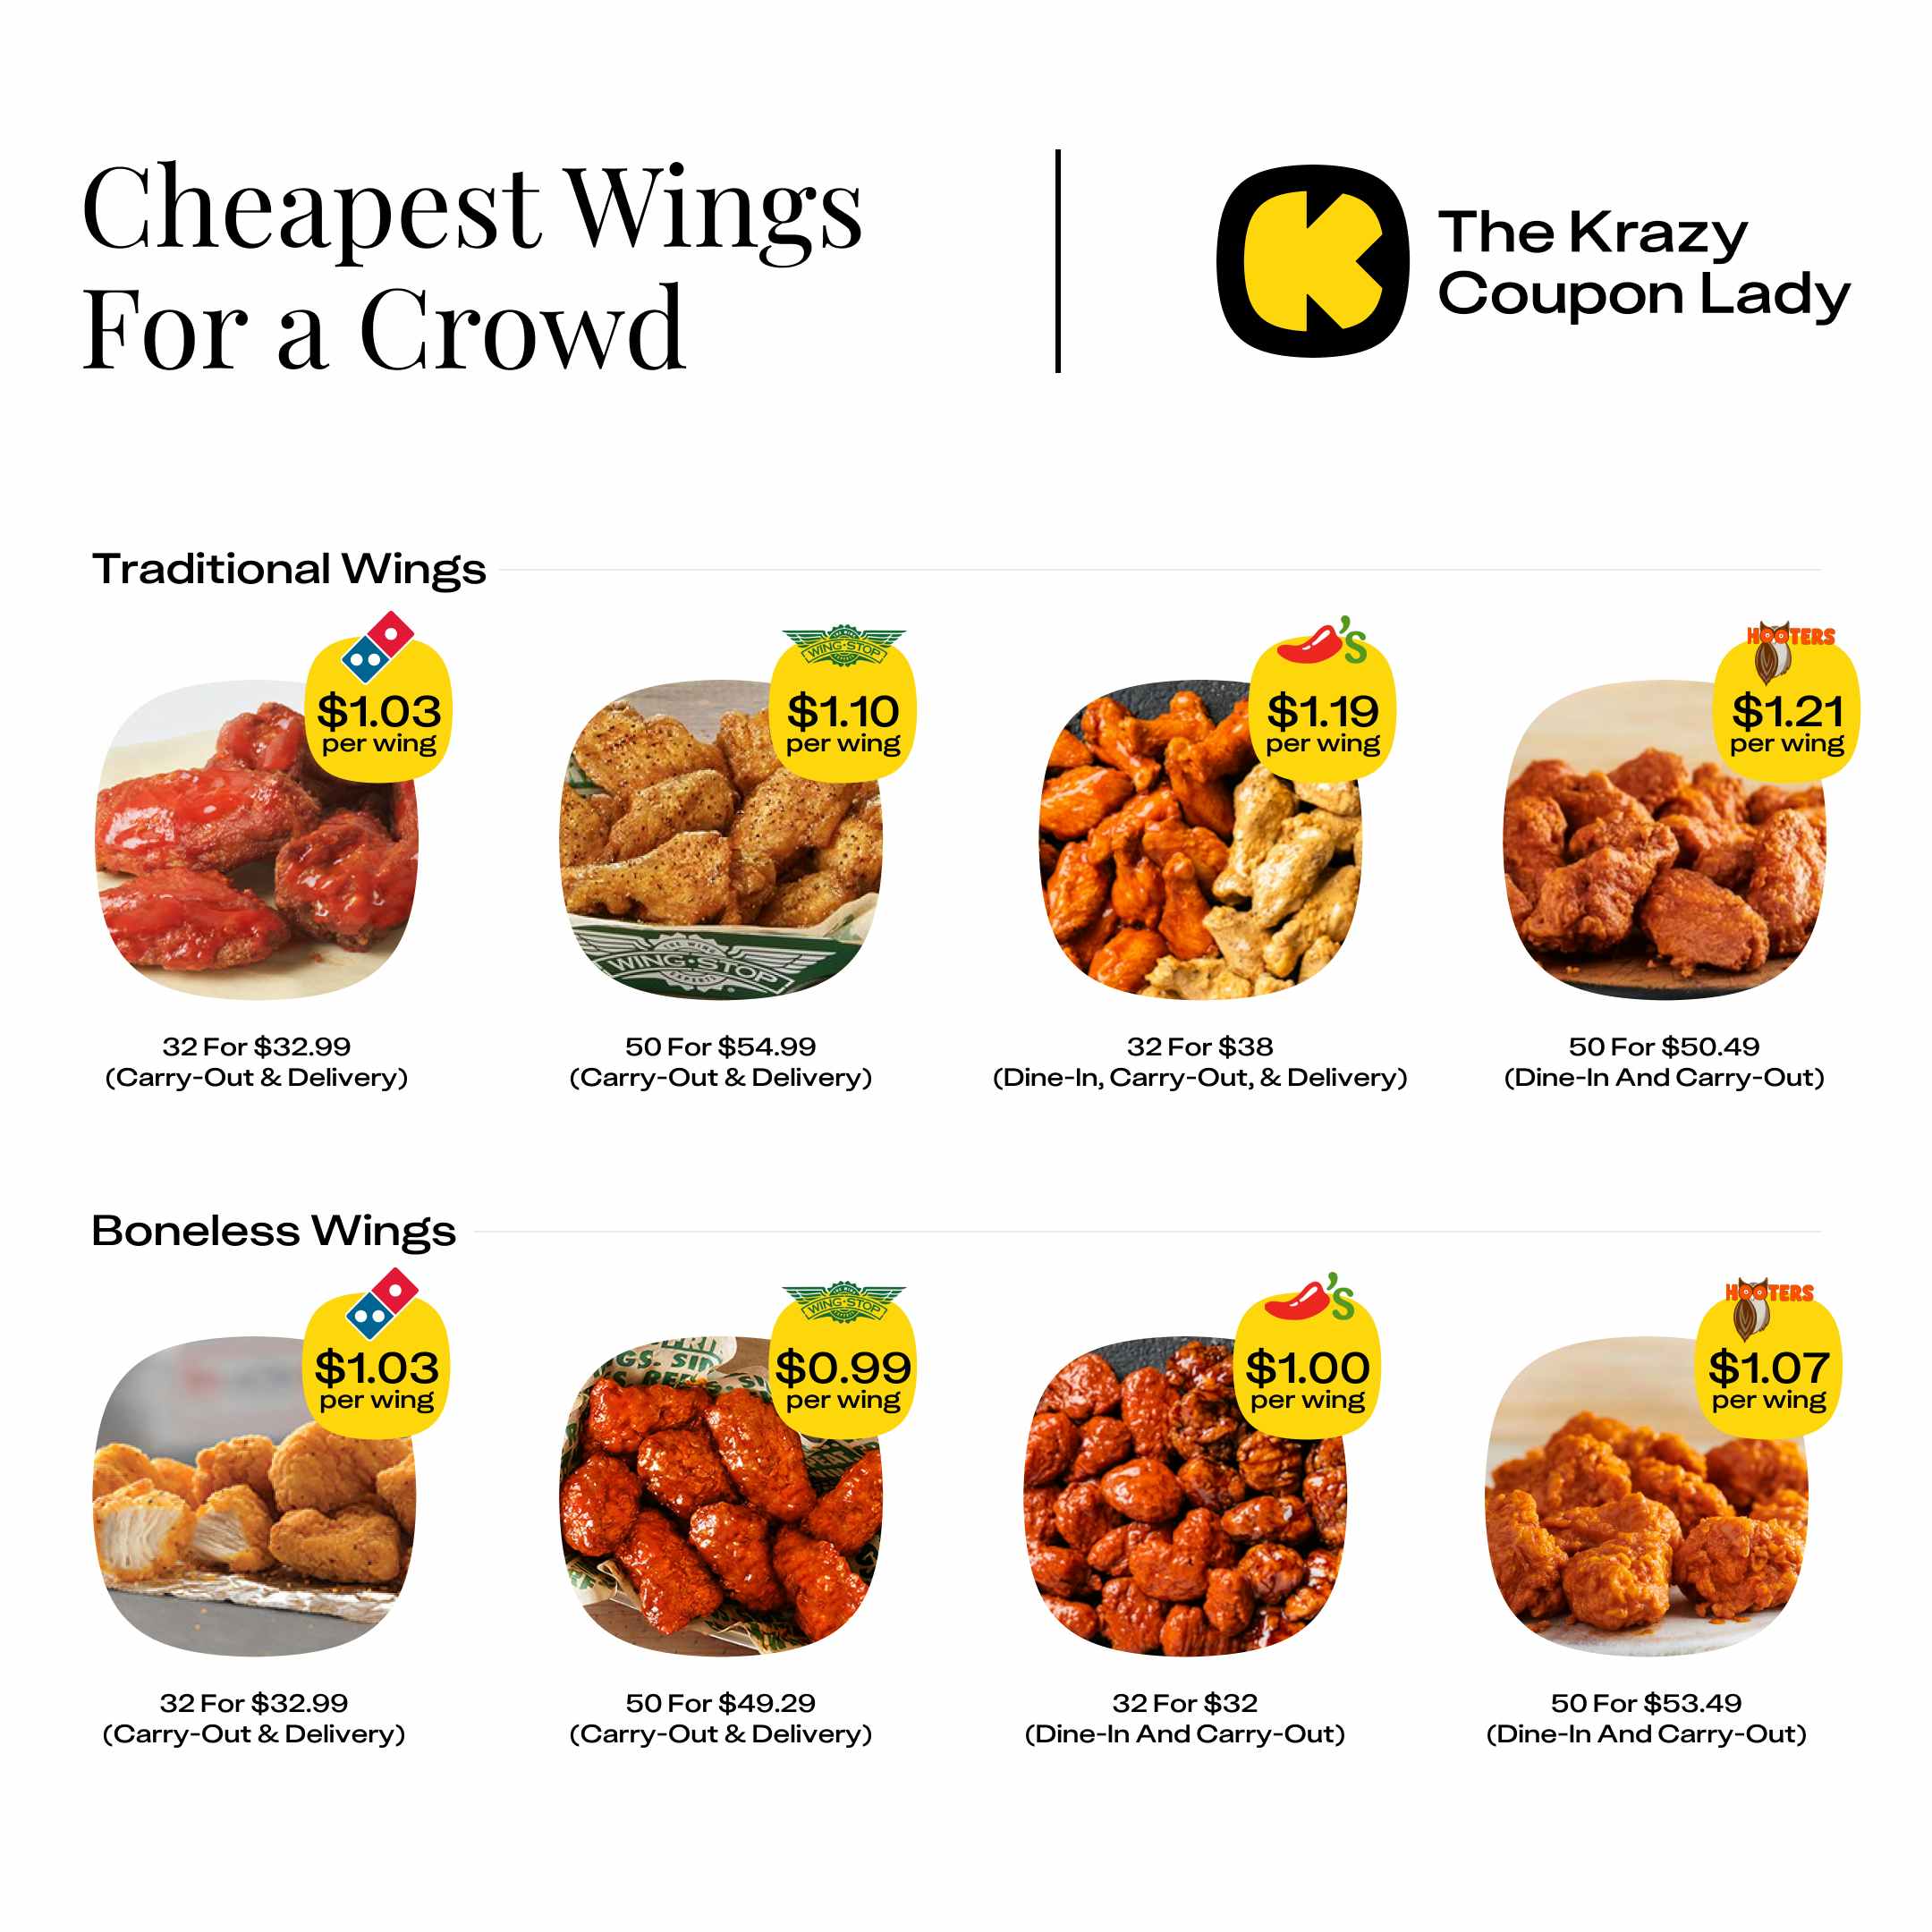 Cheapest-wings-for-a-crowd